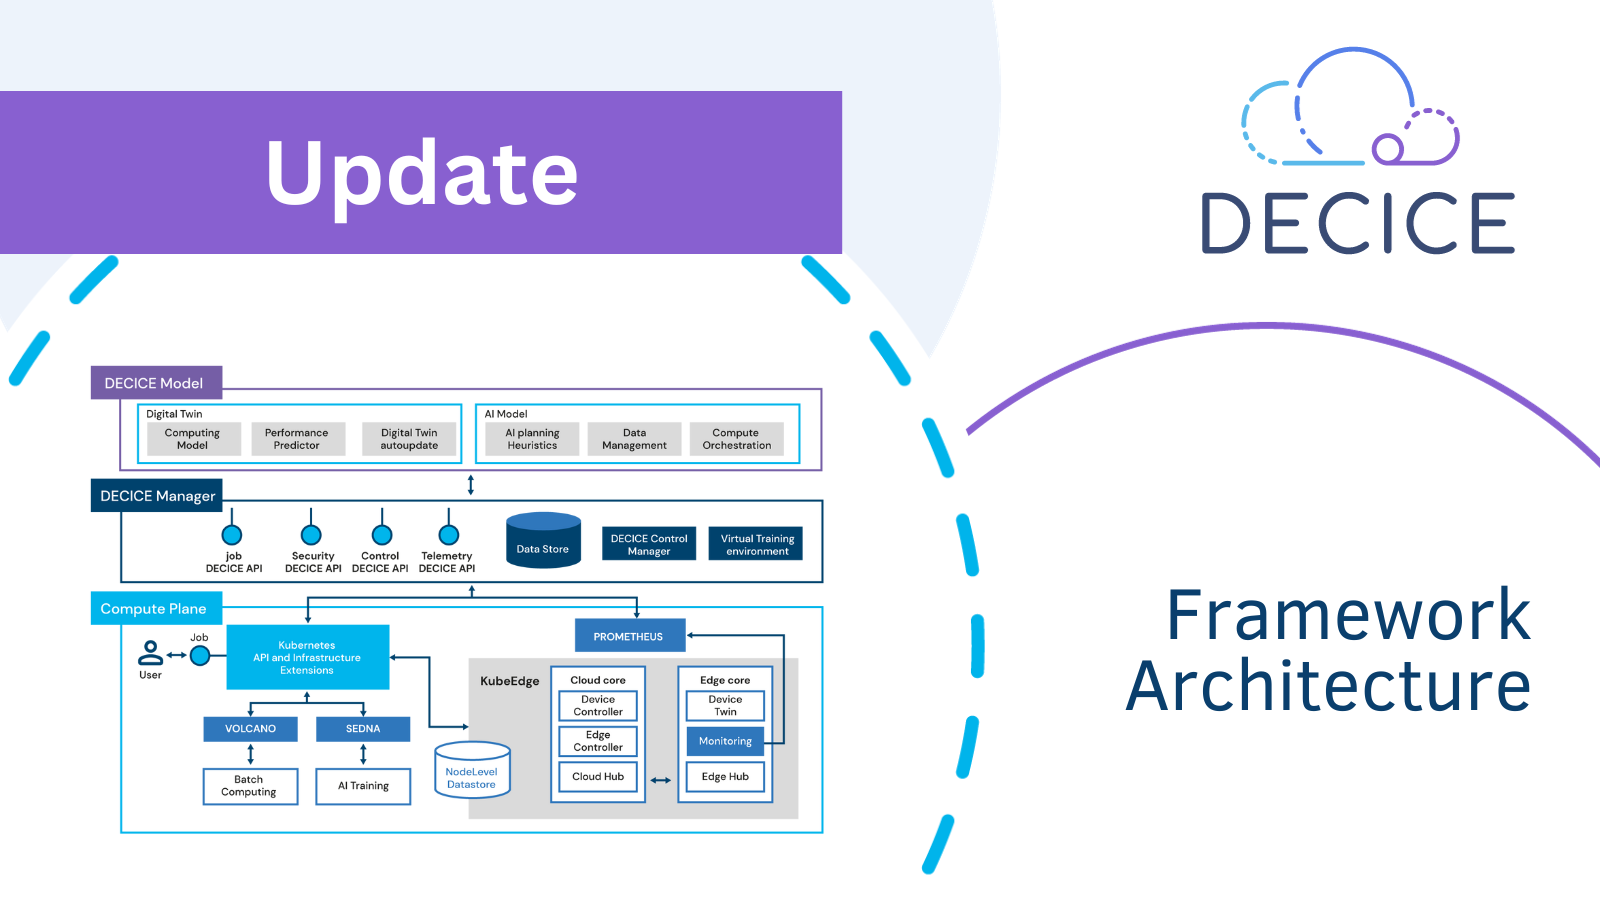 DECICE presents their Update on the framework architecture.